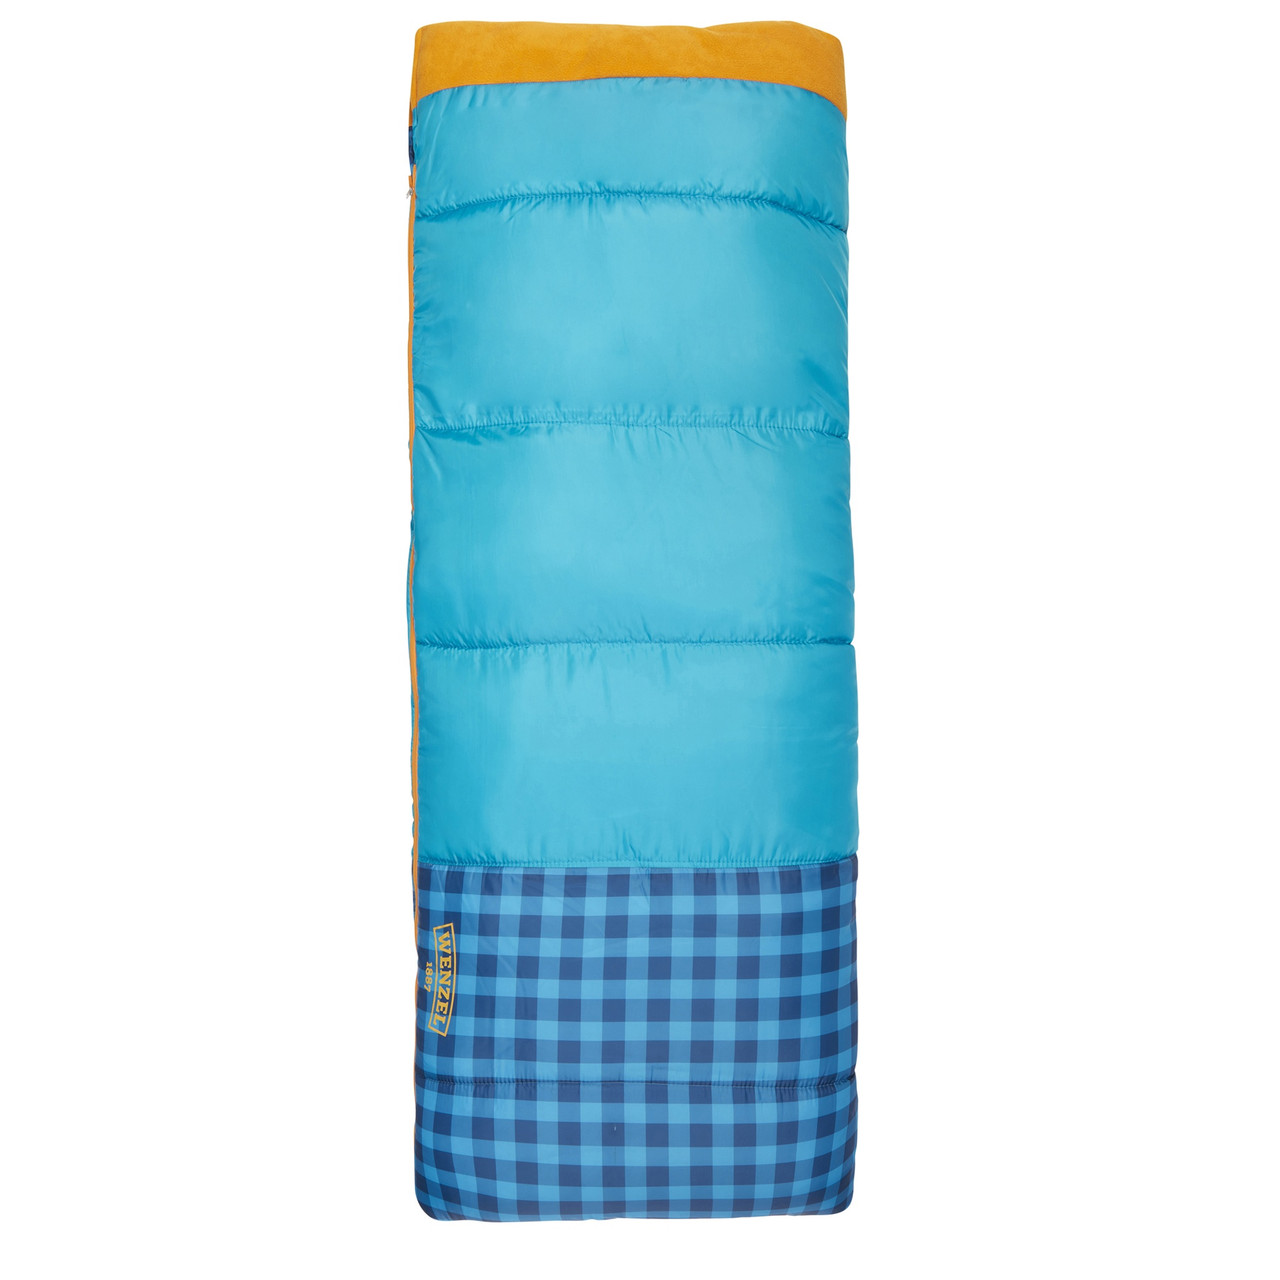 Wenzel Sapling Youth Sleeping Bag, blue, shown fully zipped